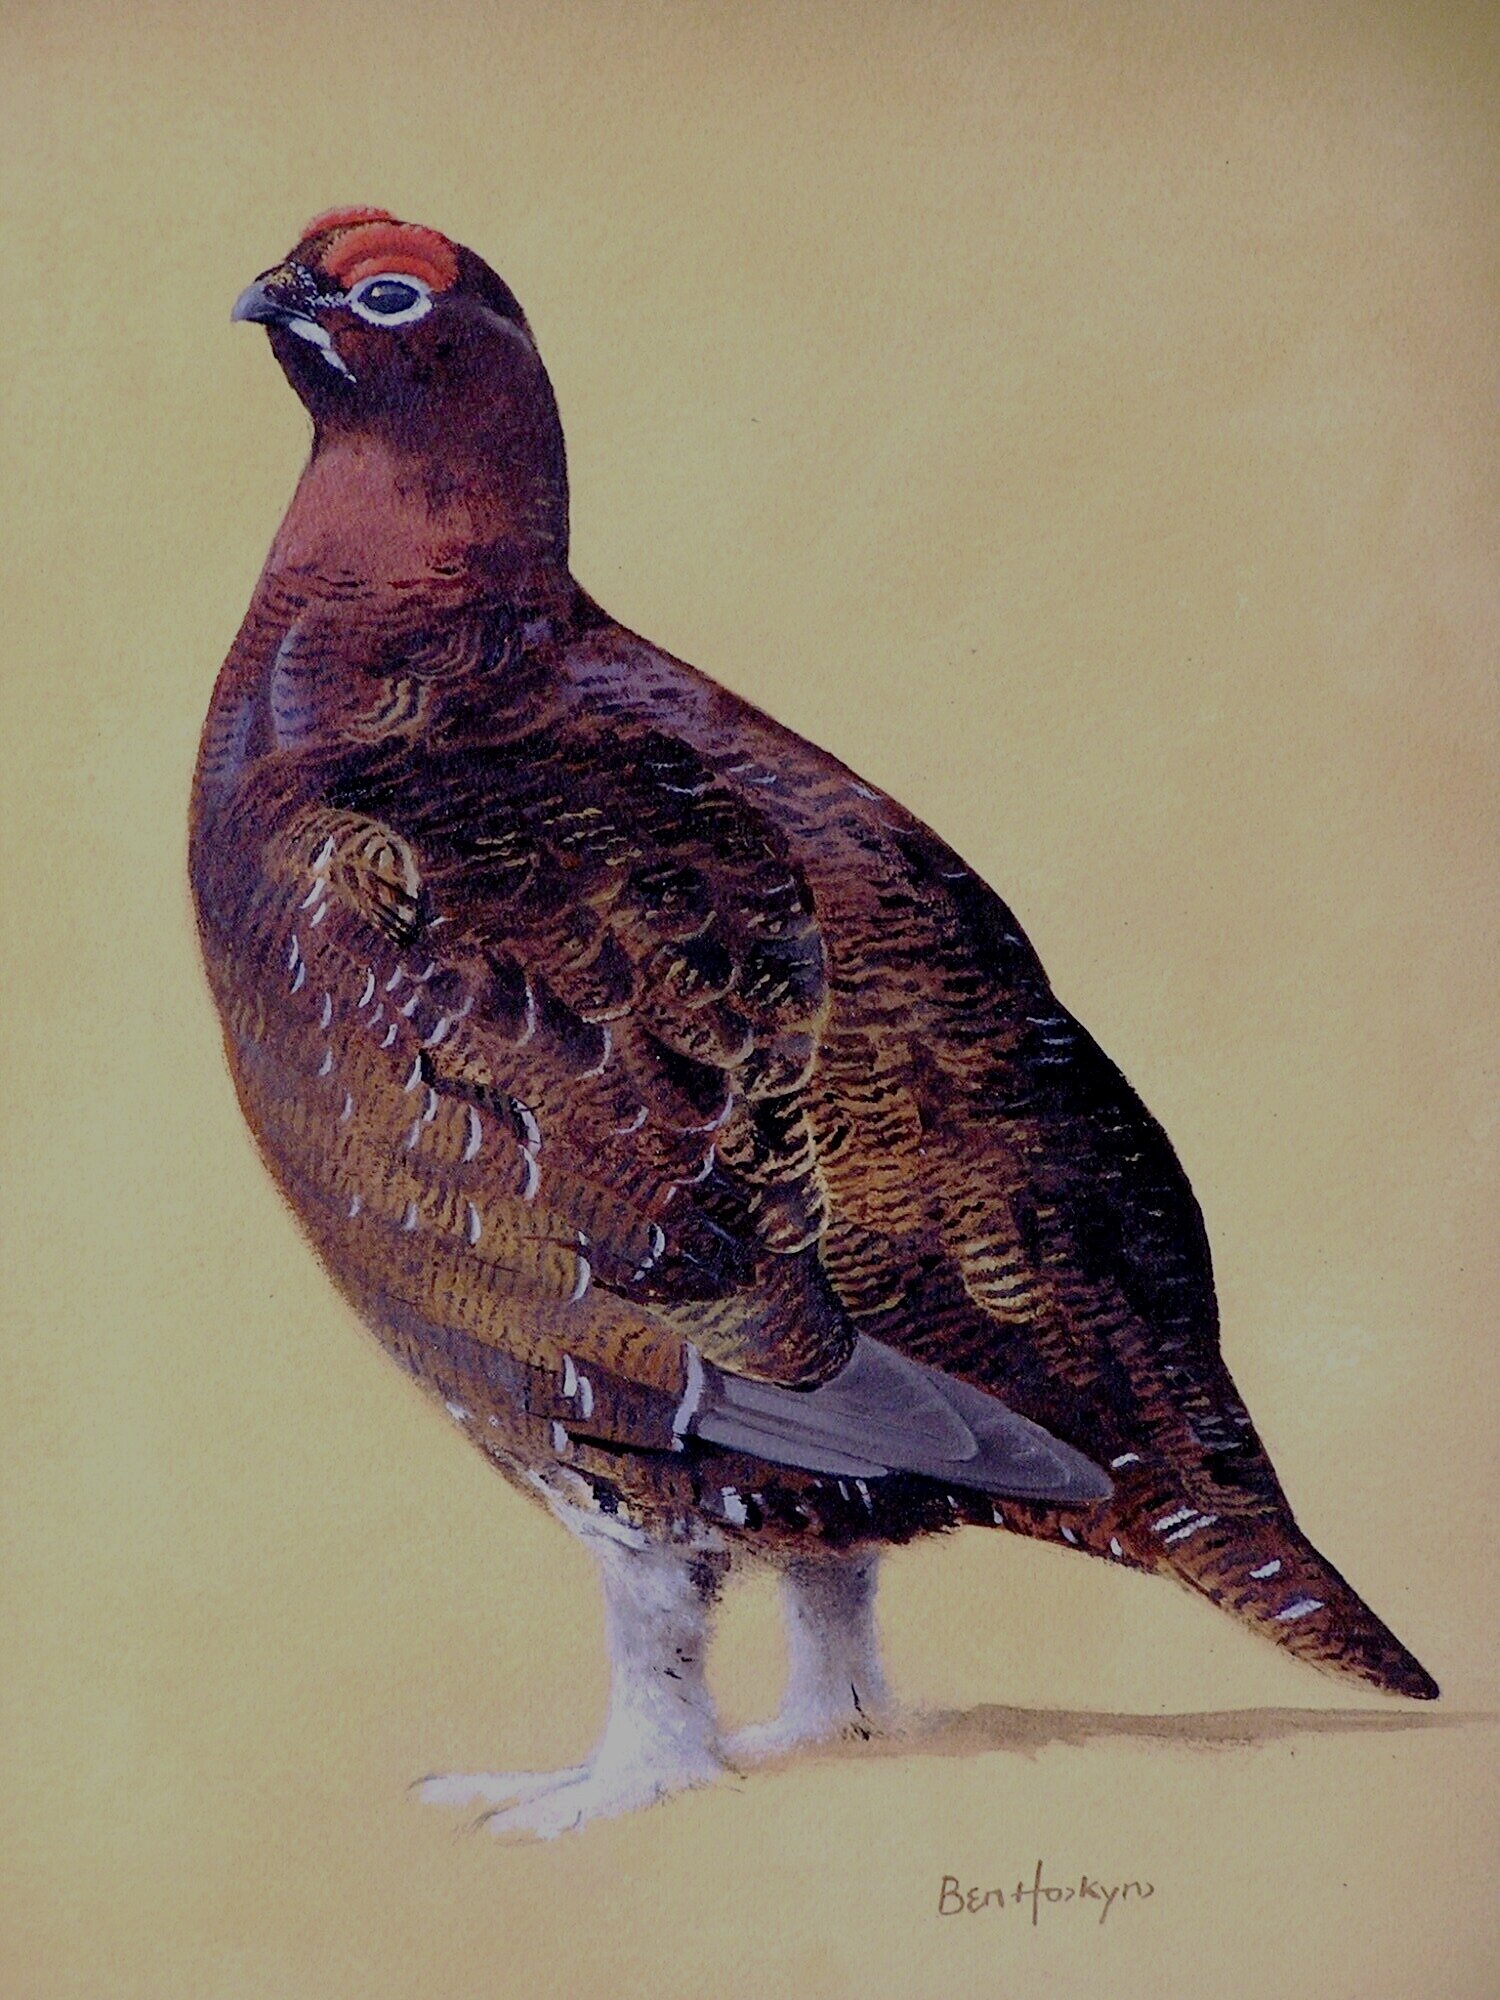 Cock Grouse